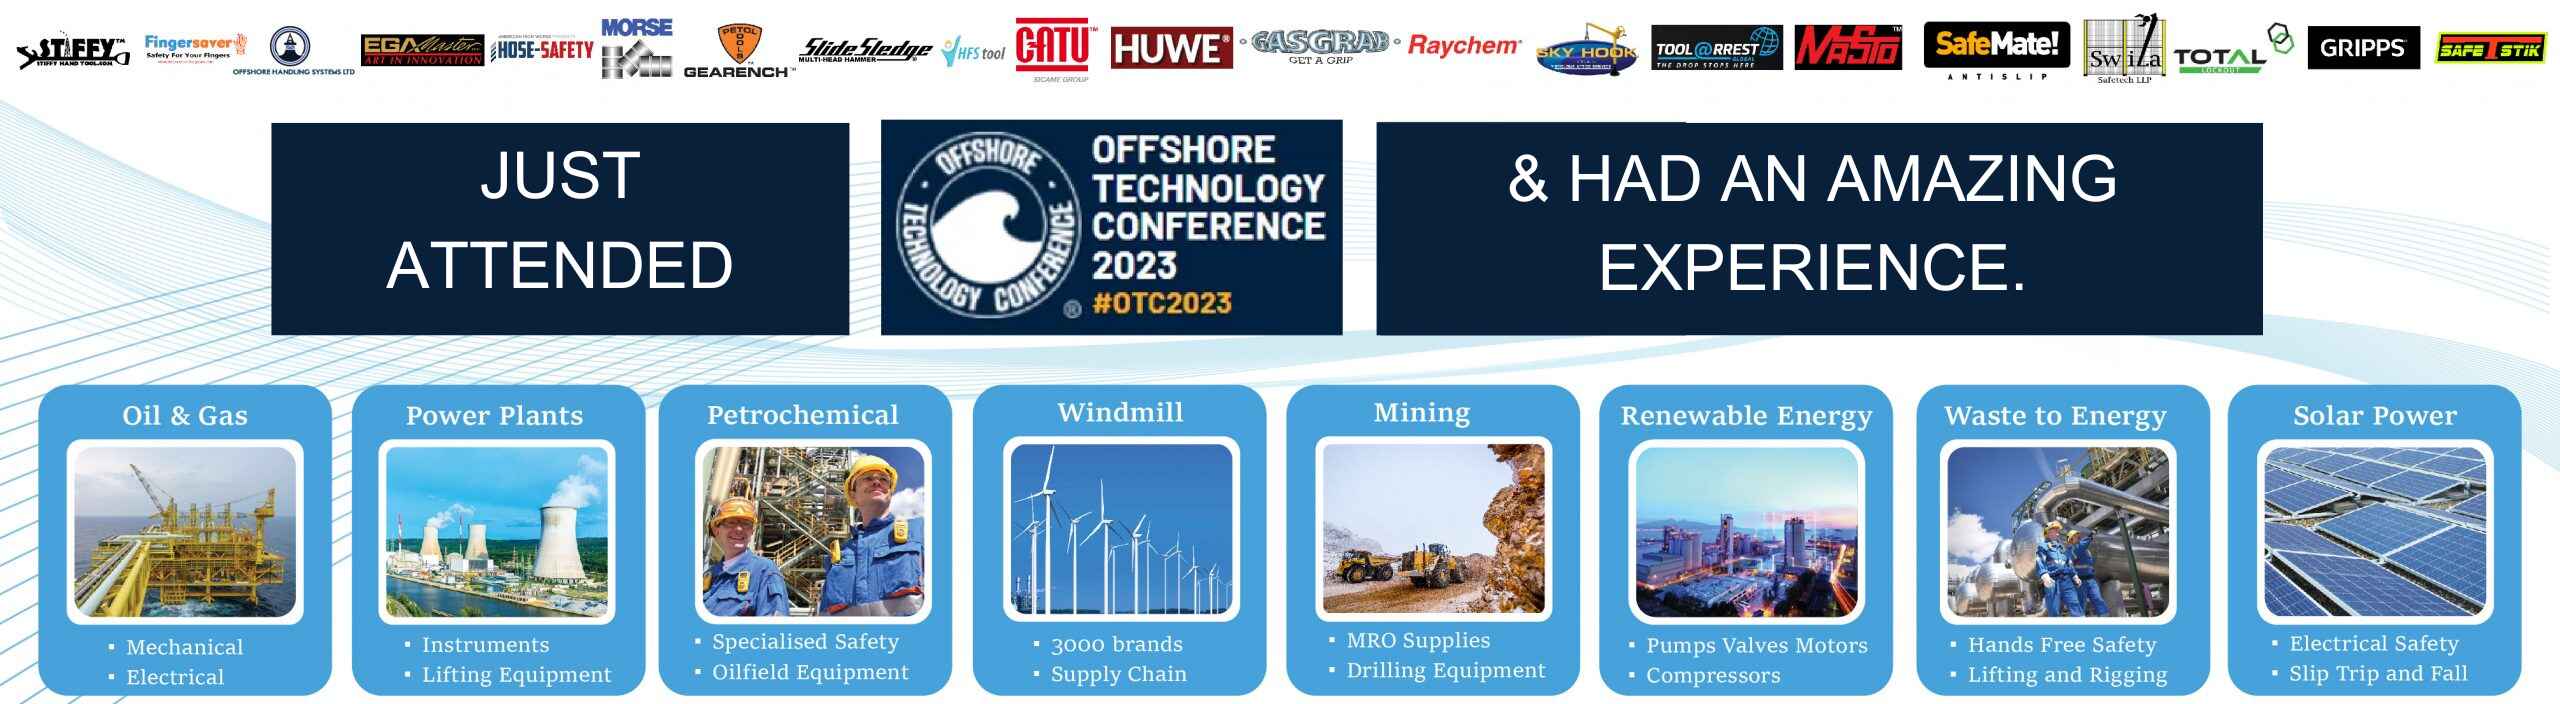 Offshore-technology-conference